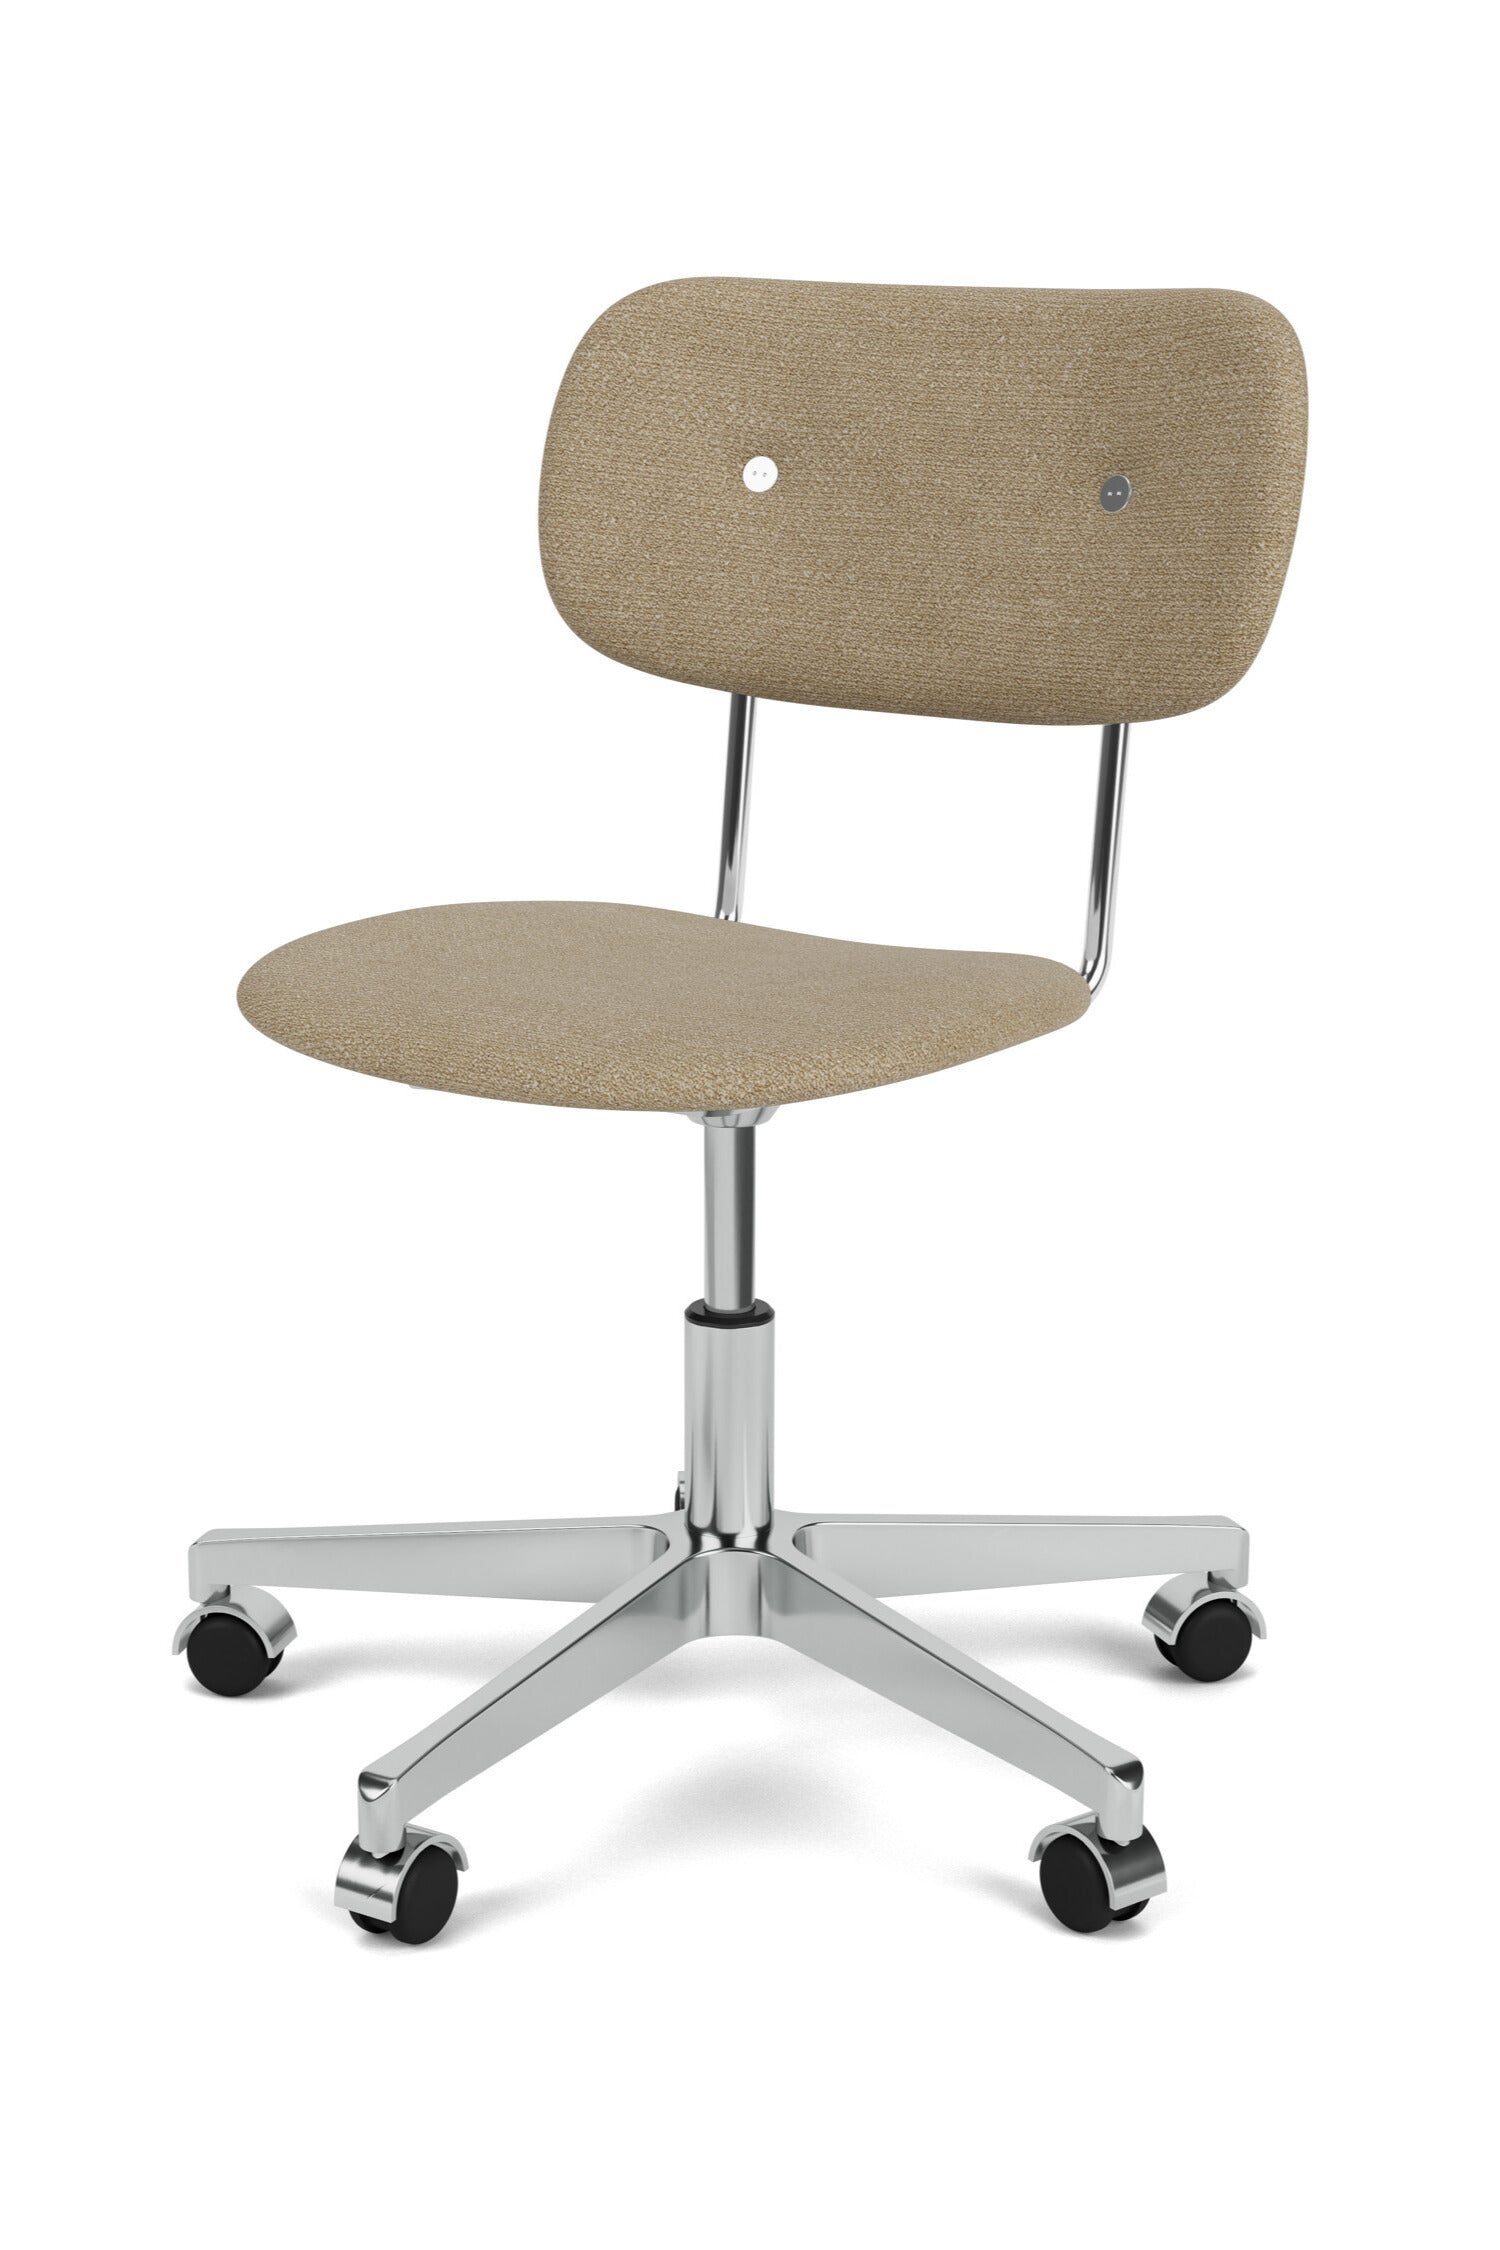 The Co Task Chairs Fully Upholstered with Aluminium Frame without armrest from Audo Copenhagen.